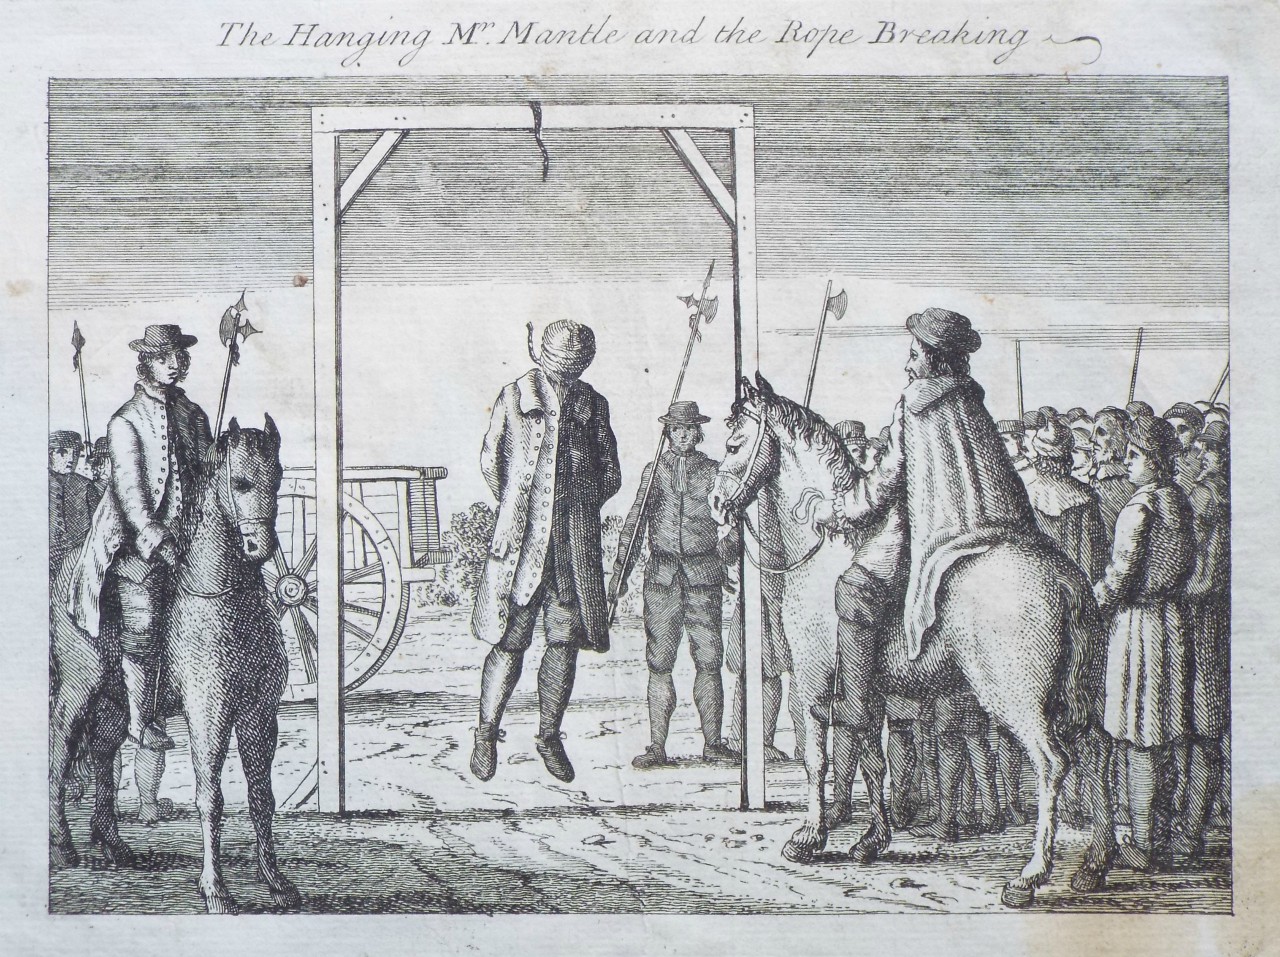 Etching - The Hanging of Mr Mantle and the Rope Breaking.